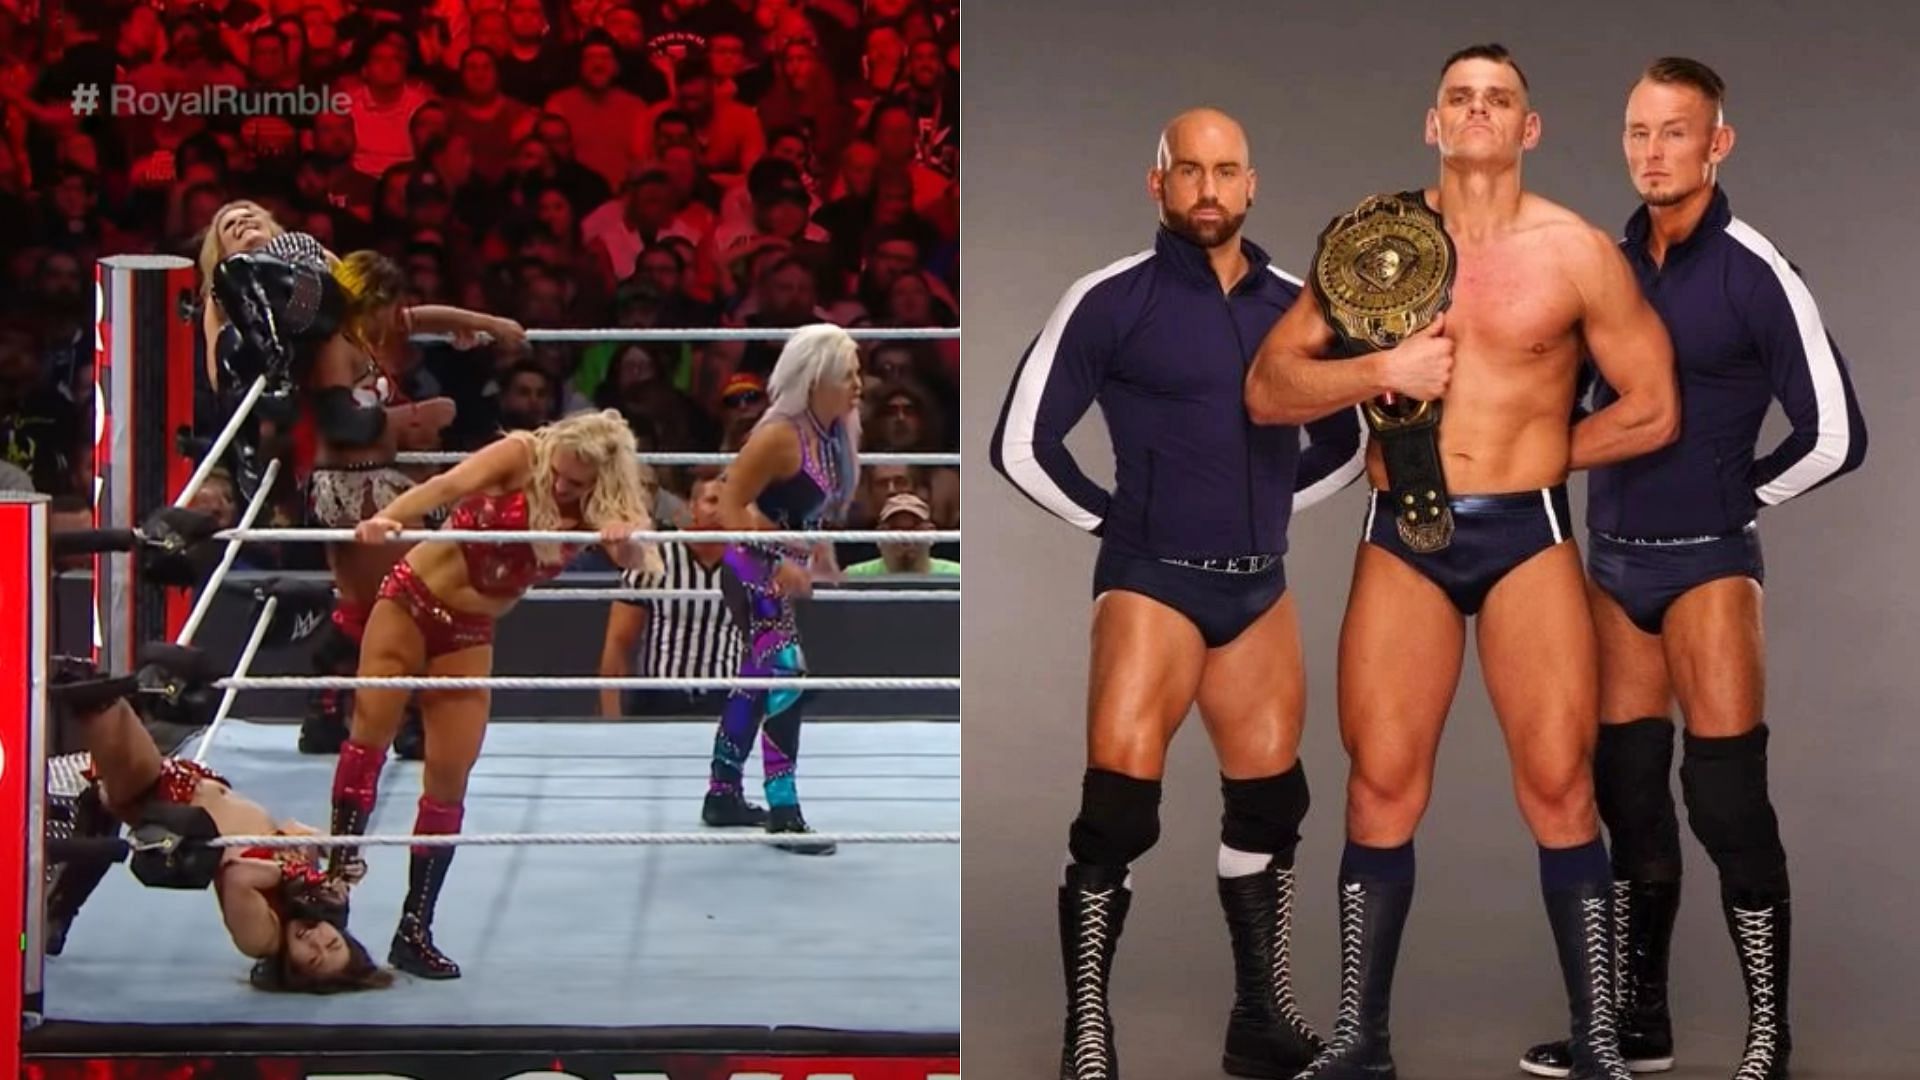 Imperium is an all-male WWE faction